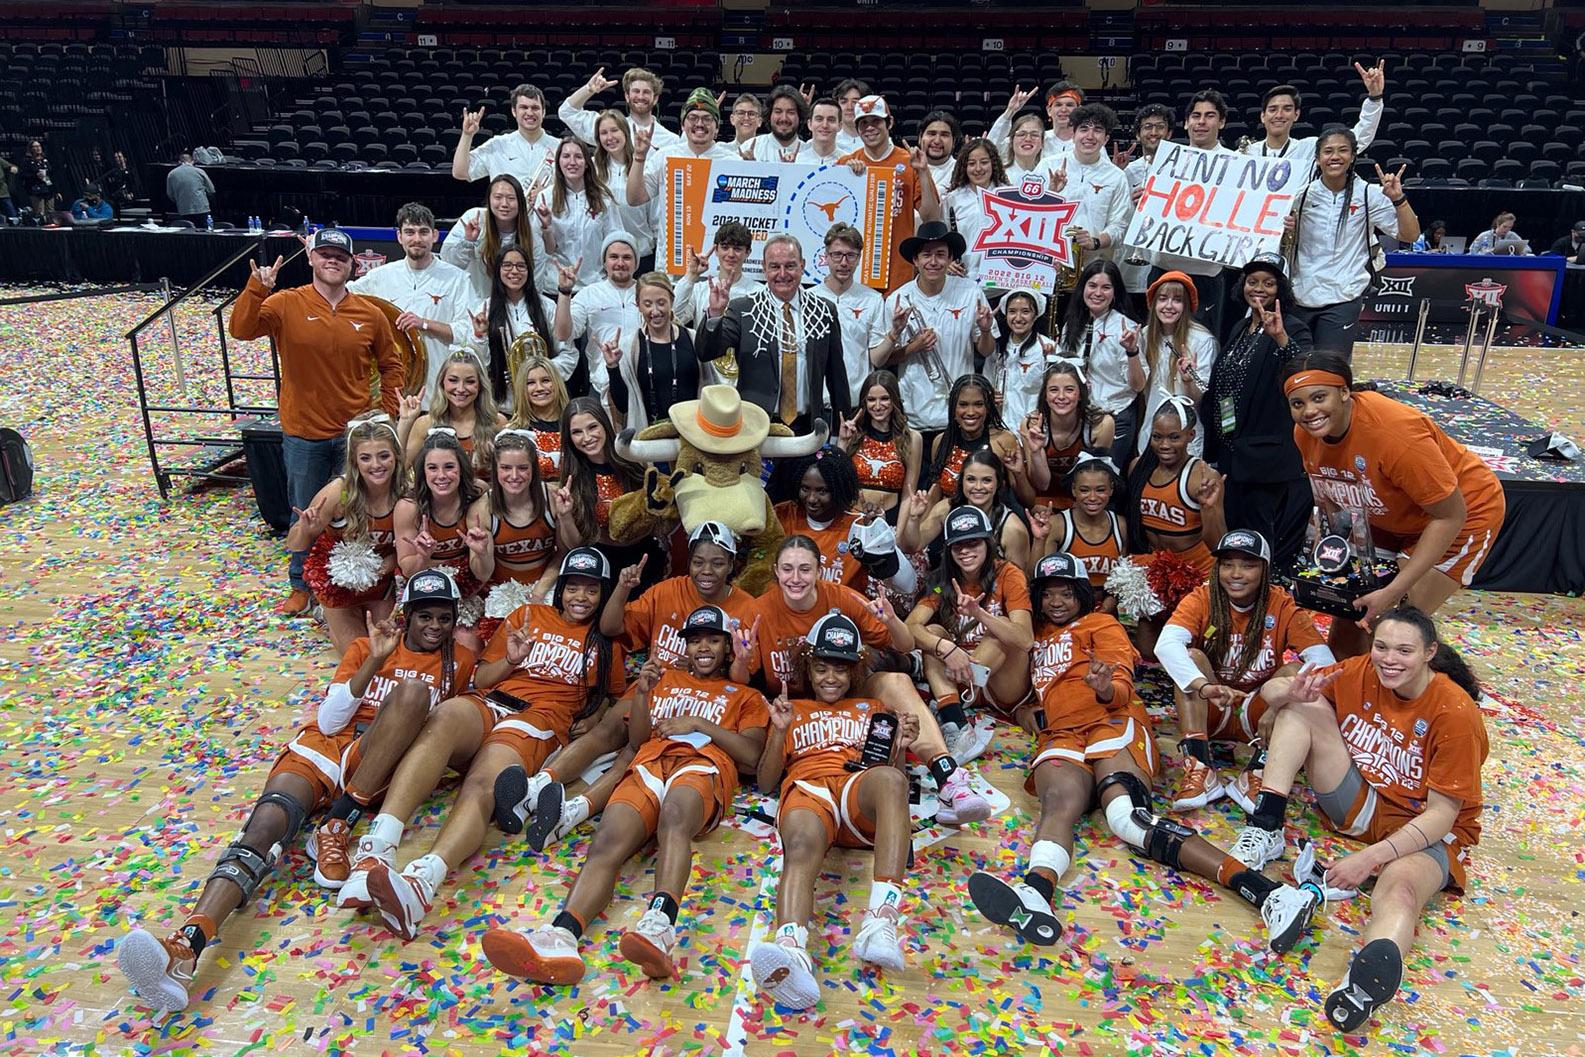 A Group photo of the pep band with Beevo and Cheerleaders on the basketball court